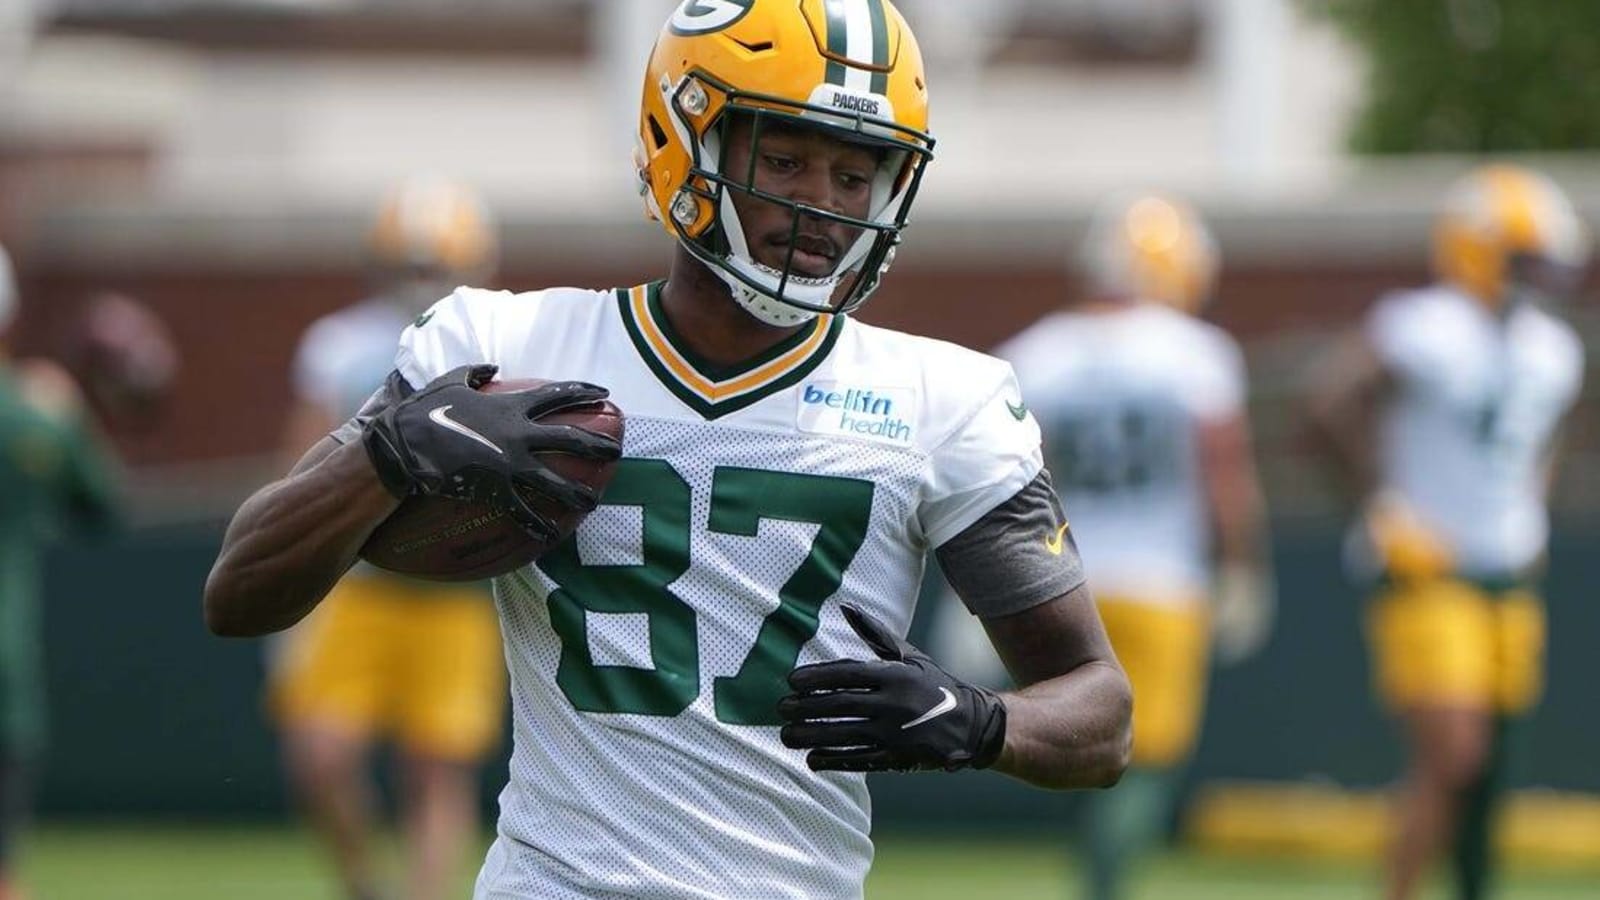 Packers QB Aaron Rodgers loving underdog rookie WR